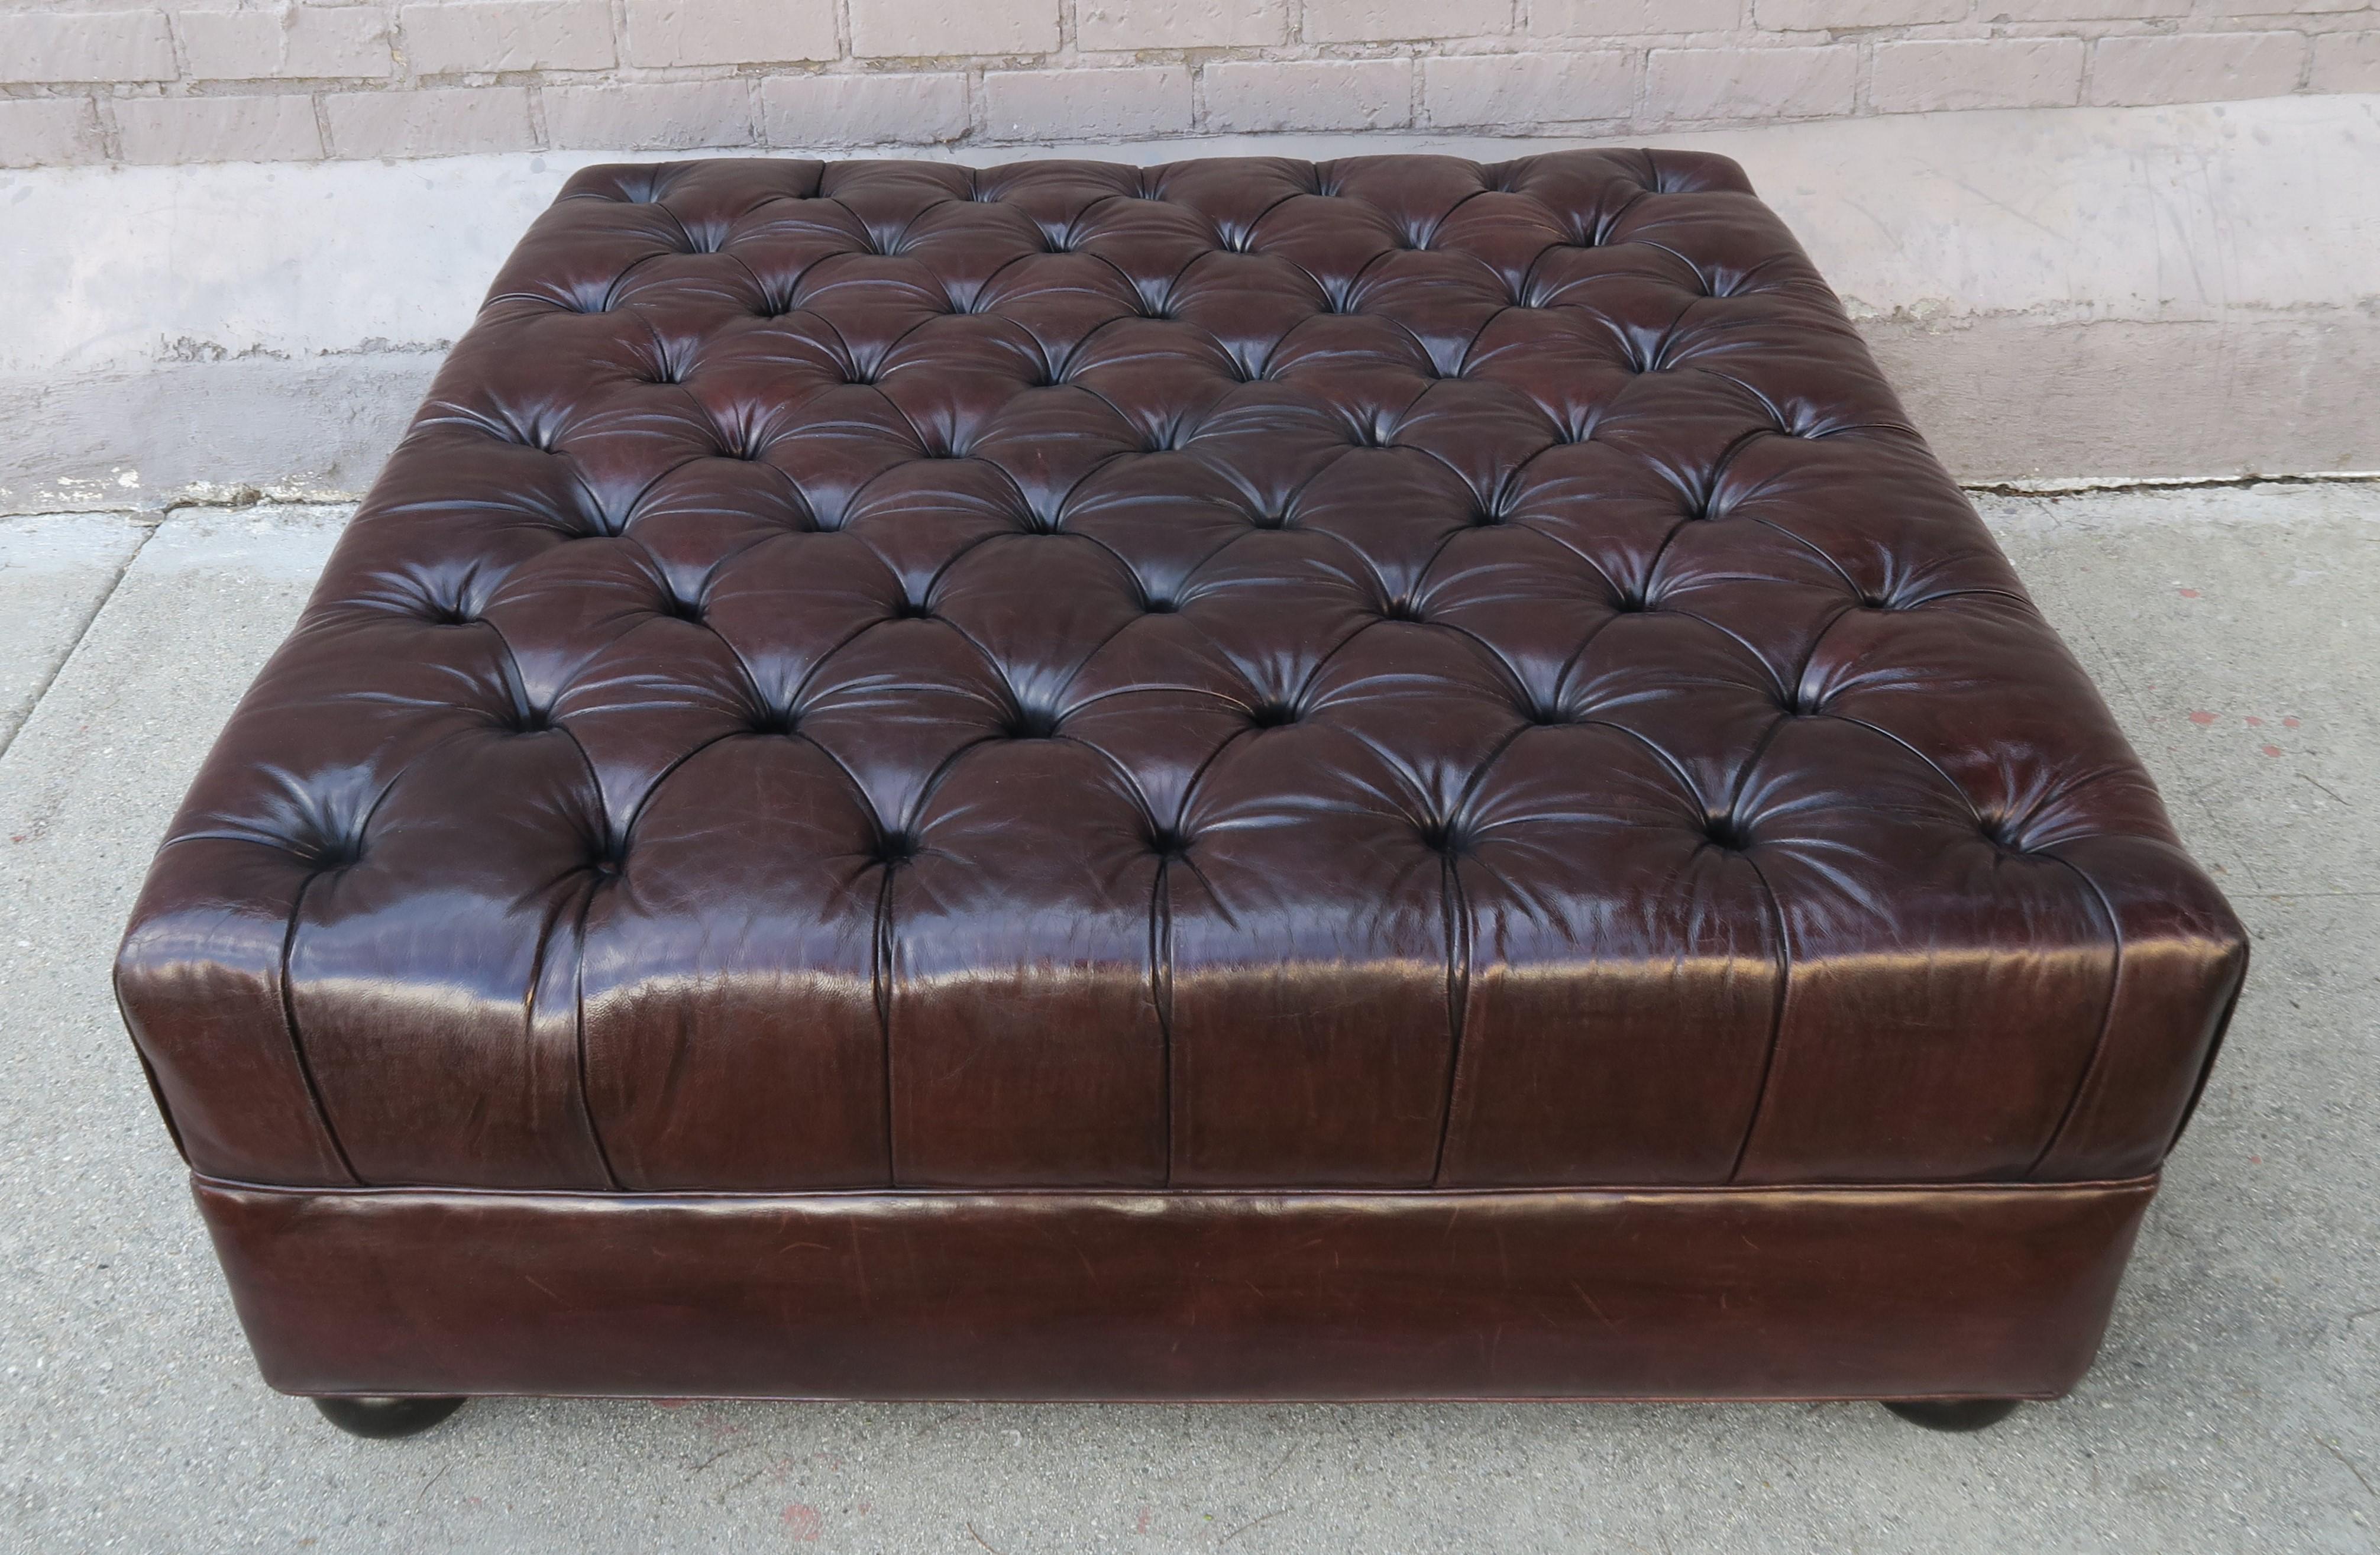 Monumental scale rich chocolate brown colored English style leather tufted square shaped ottoman with bun feet. The white mark is merely a reflection, the piece is all brown.